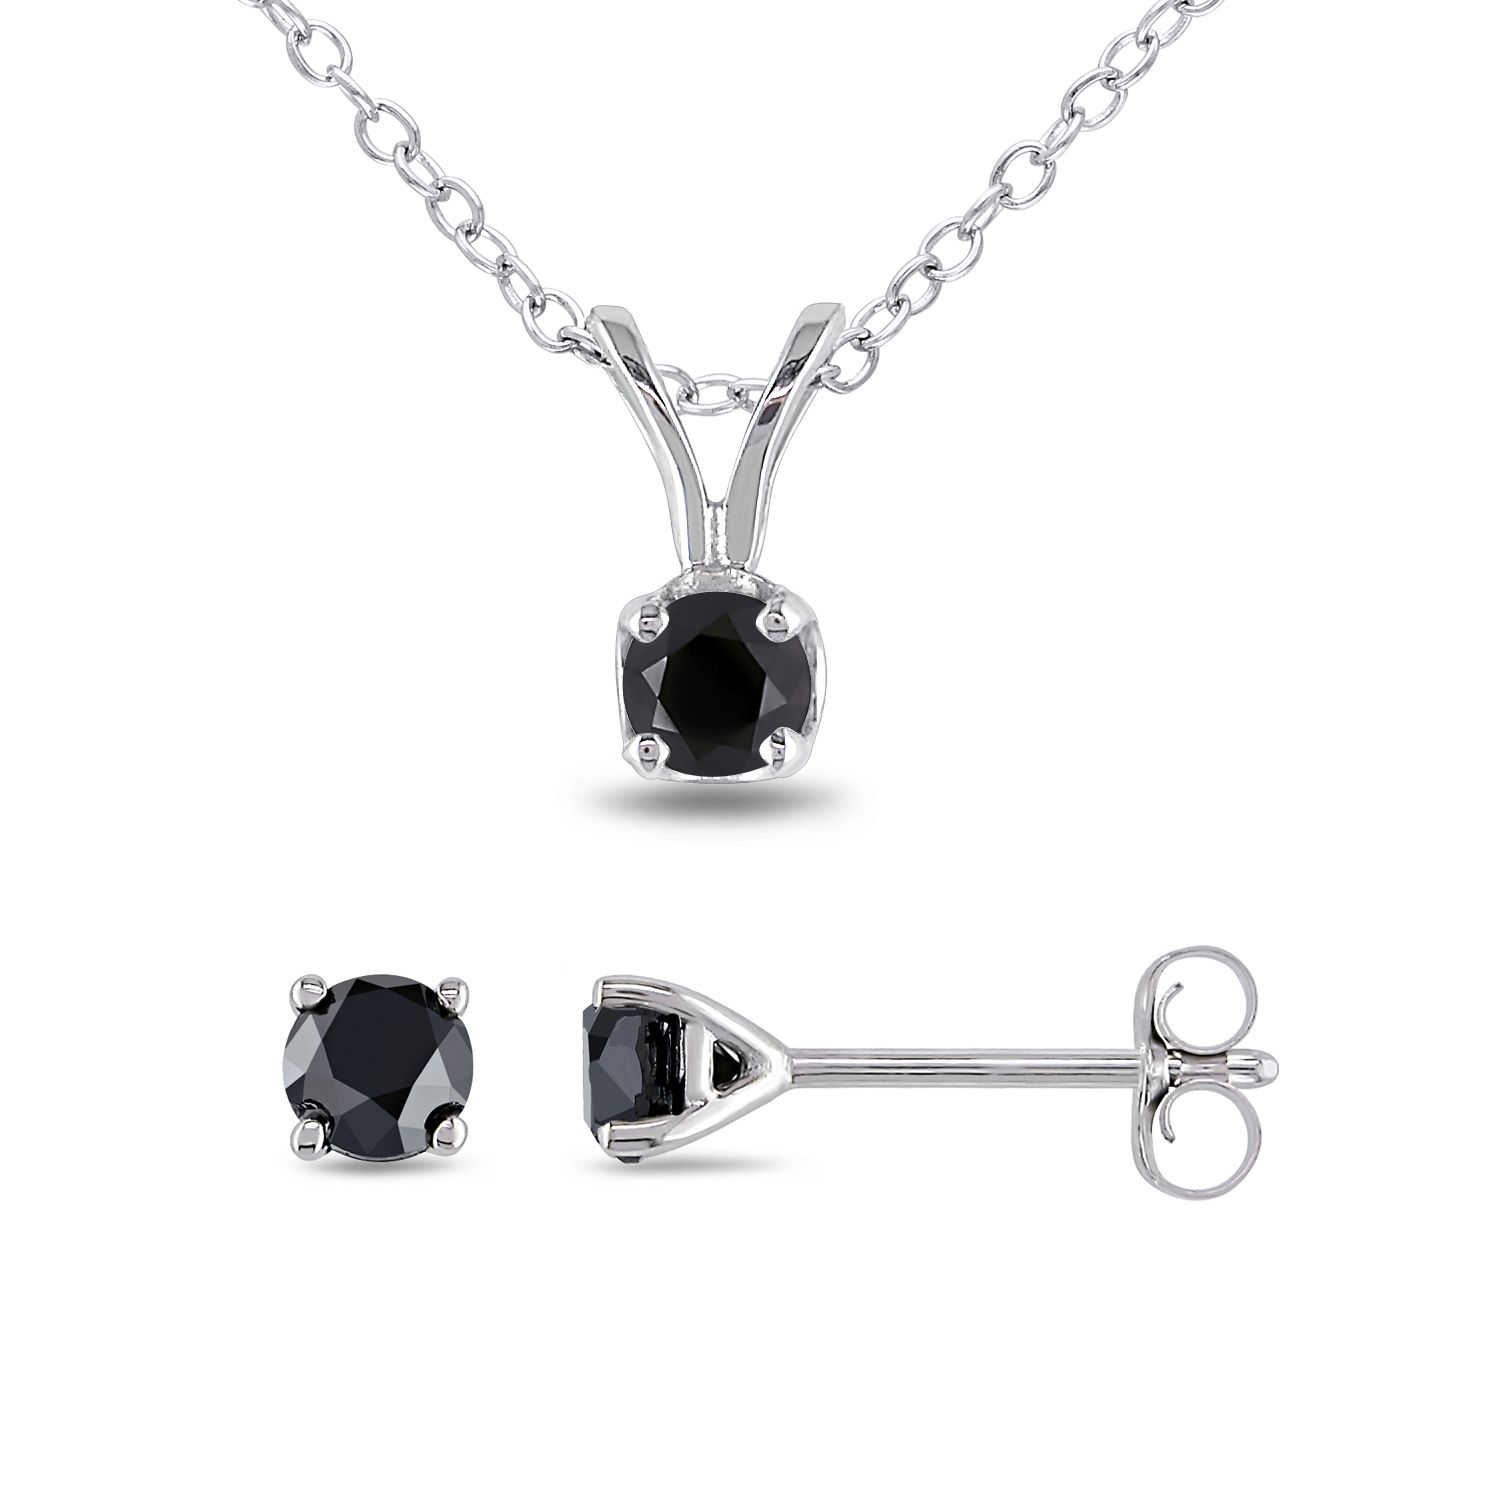 2pcs Set of 1/2 CT Black Diamond Solitaire Earrings &Pendant w/Chain in Sterling Silver